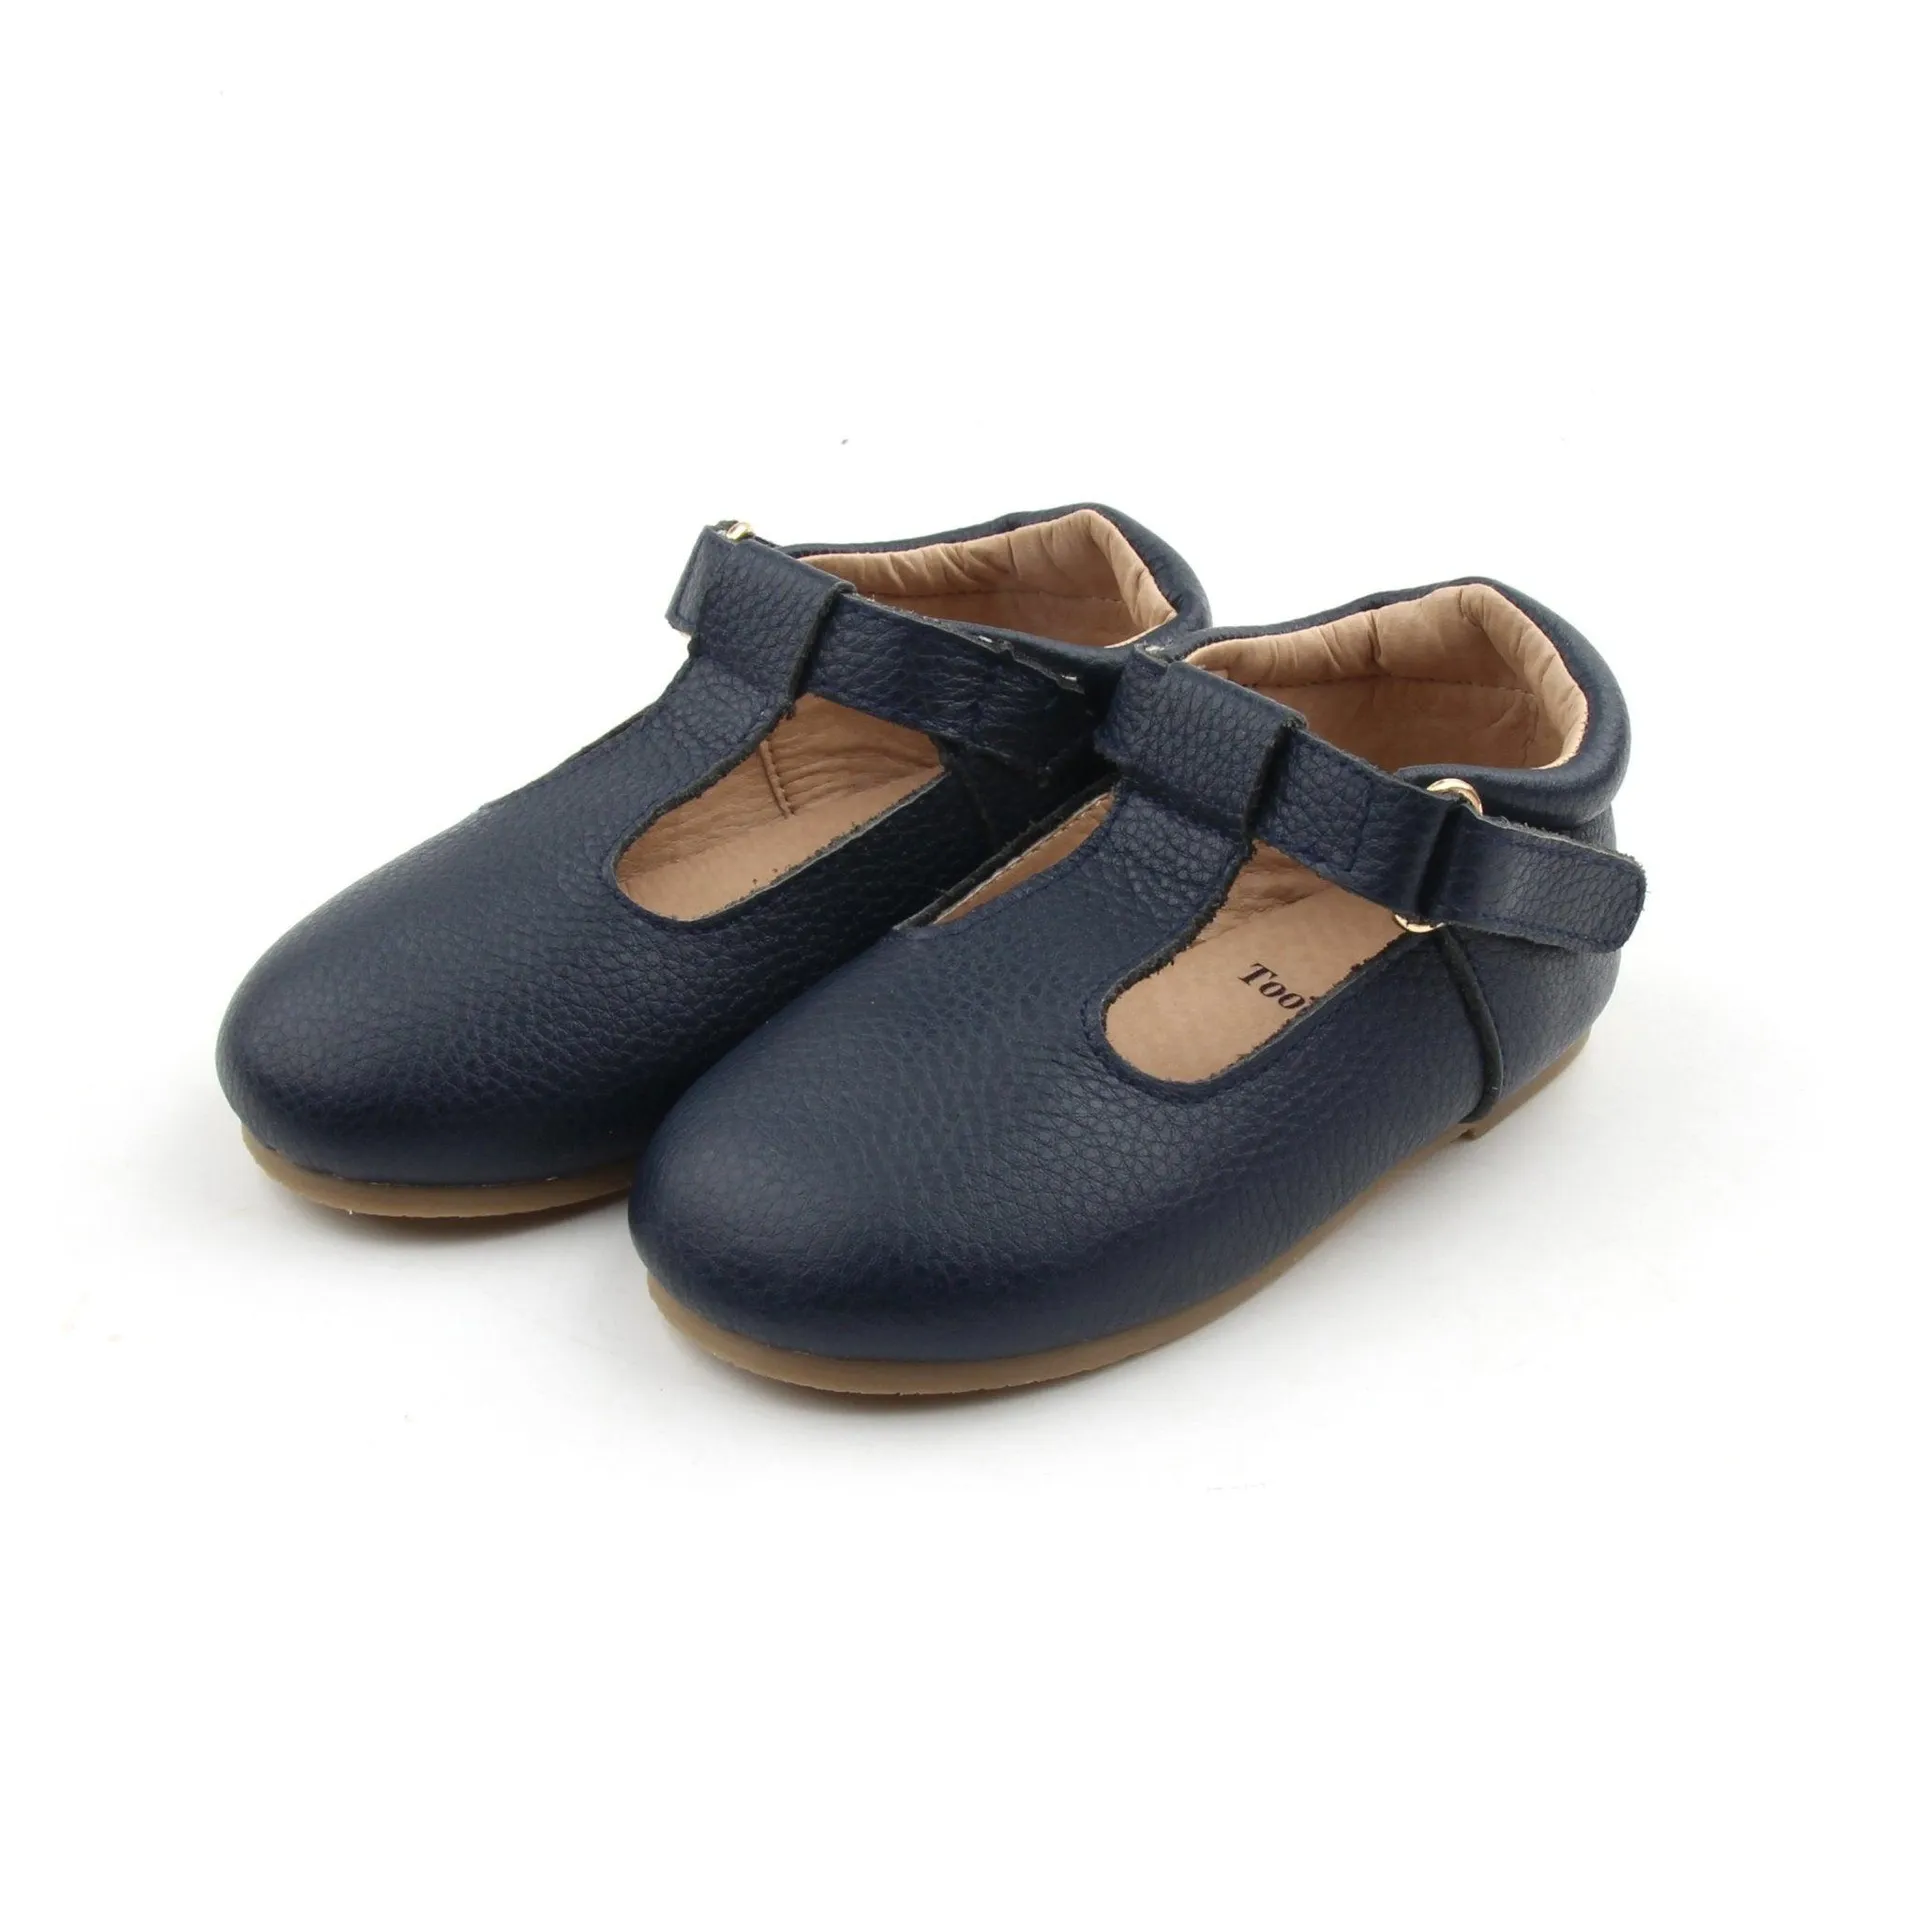 Navy T-bar shoes